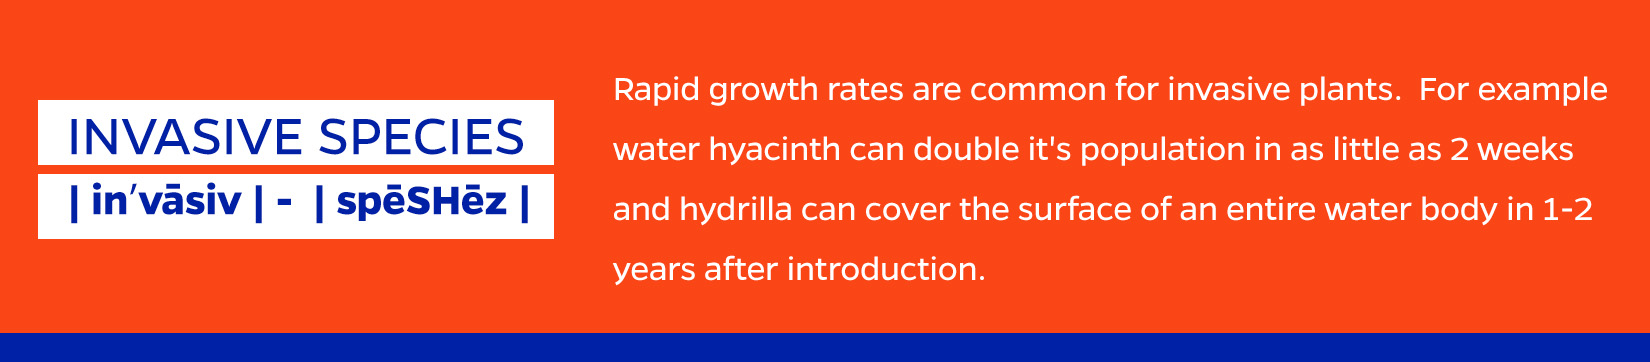 Rapid growth rates are a common characteristic of non-native plants that become invasive.  For example water hyacinth can cover the surface 